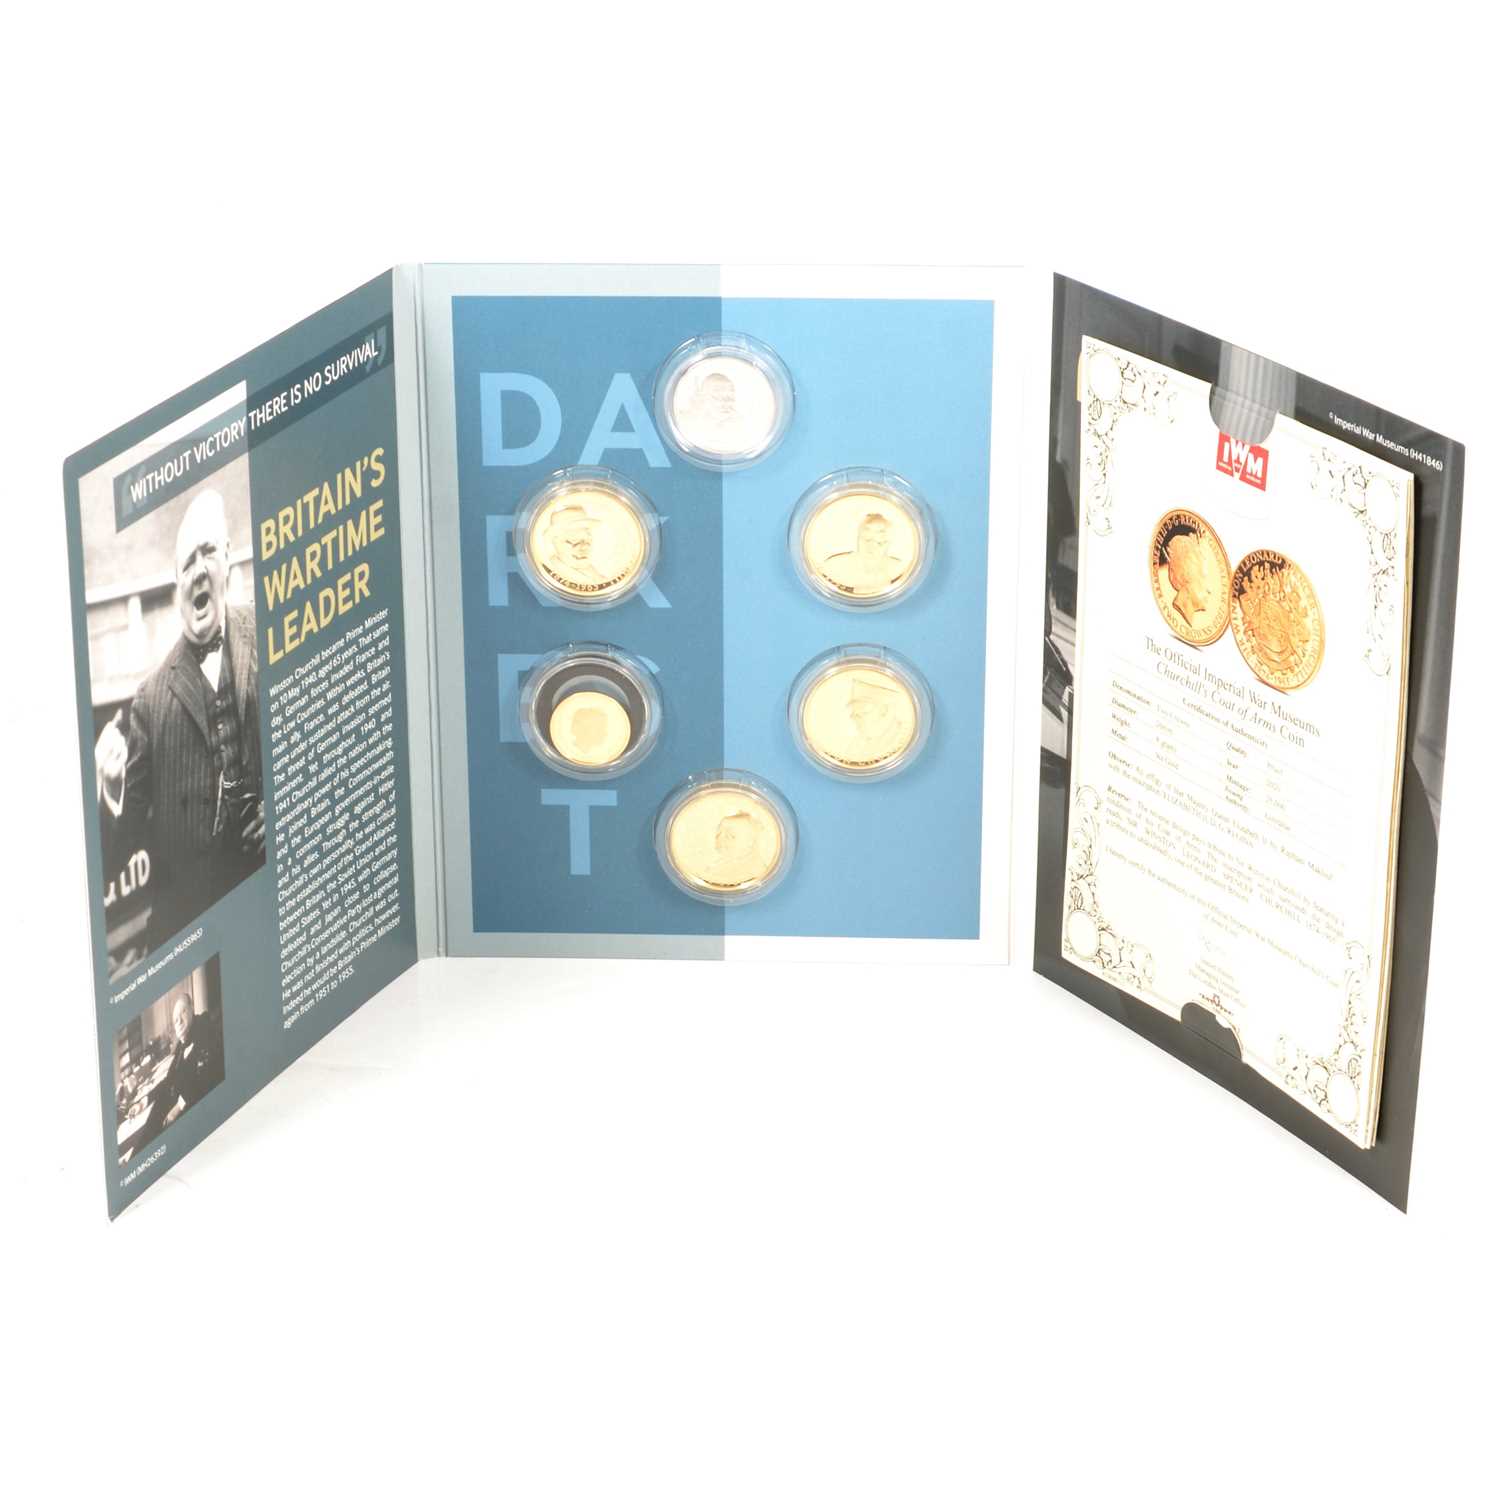 London Mint Office " "The Official Imperial War Museums" coin set,